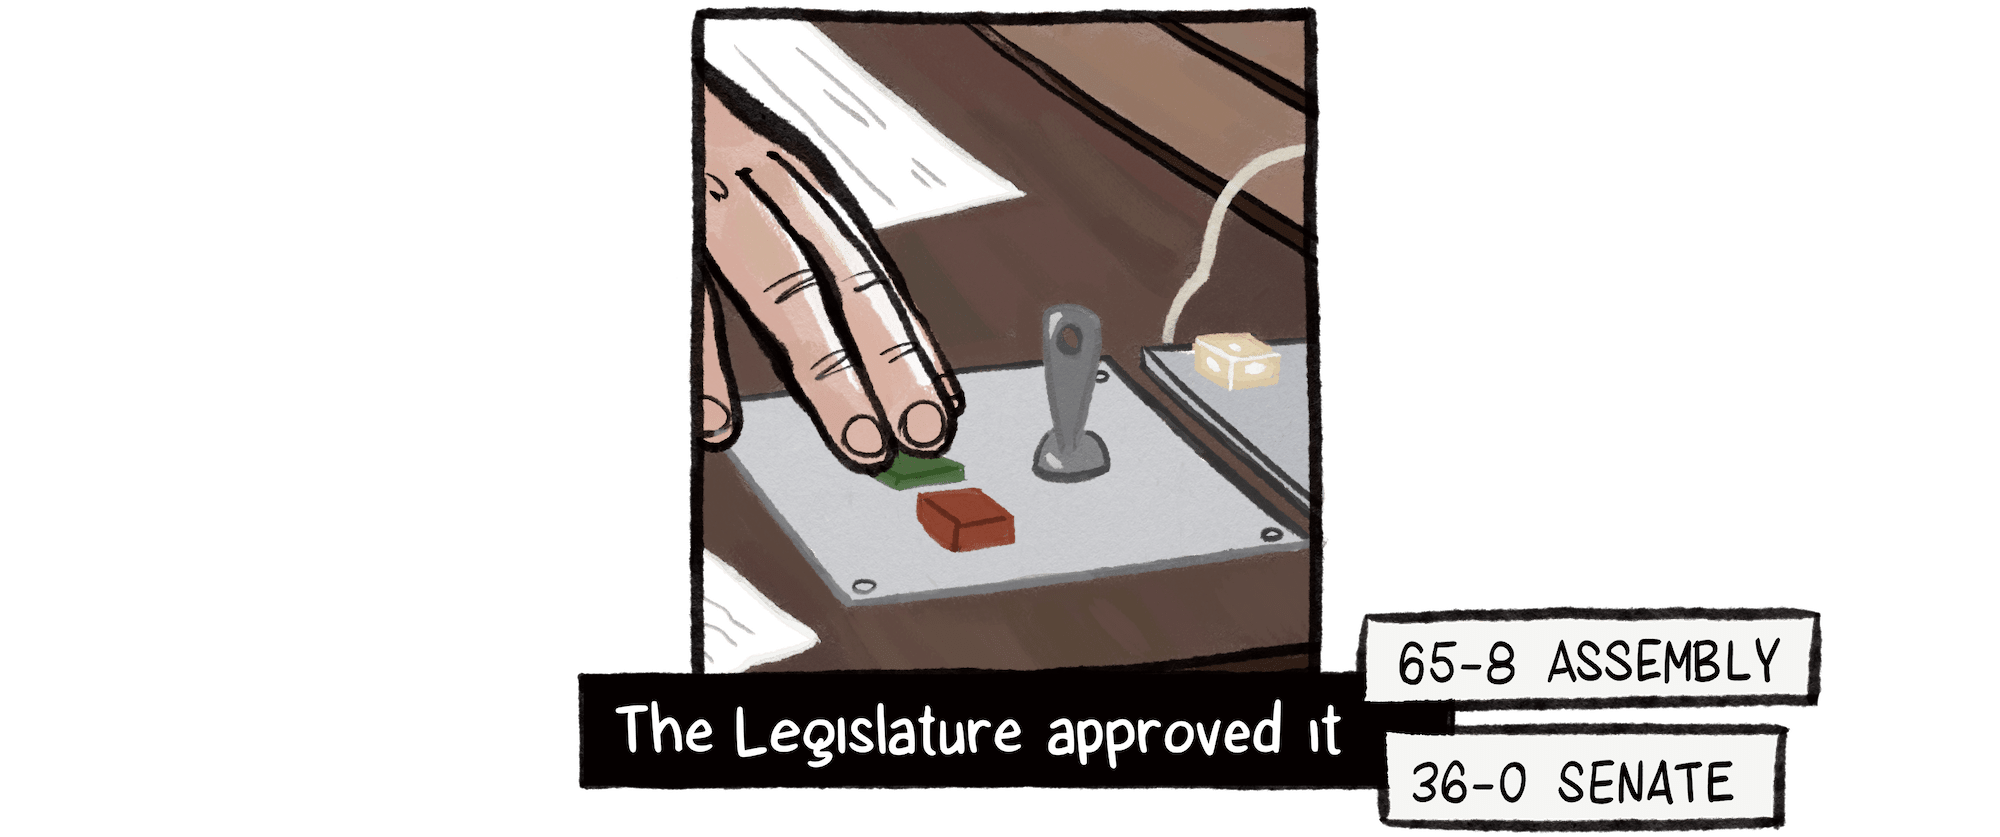 A hand is seen clicking a yes vote. The Legislature approved it. A vote total in the Assembly was 65-8 and in the Senate was 36-0.